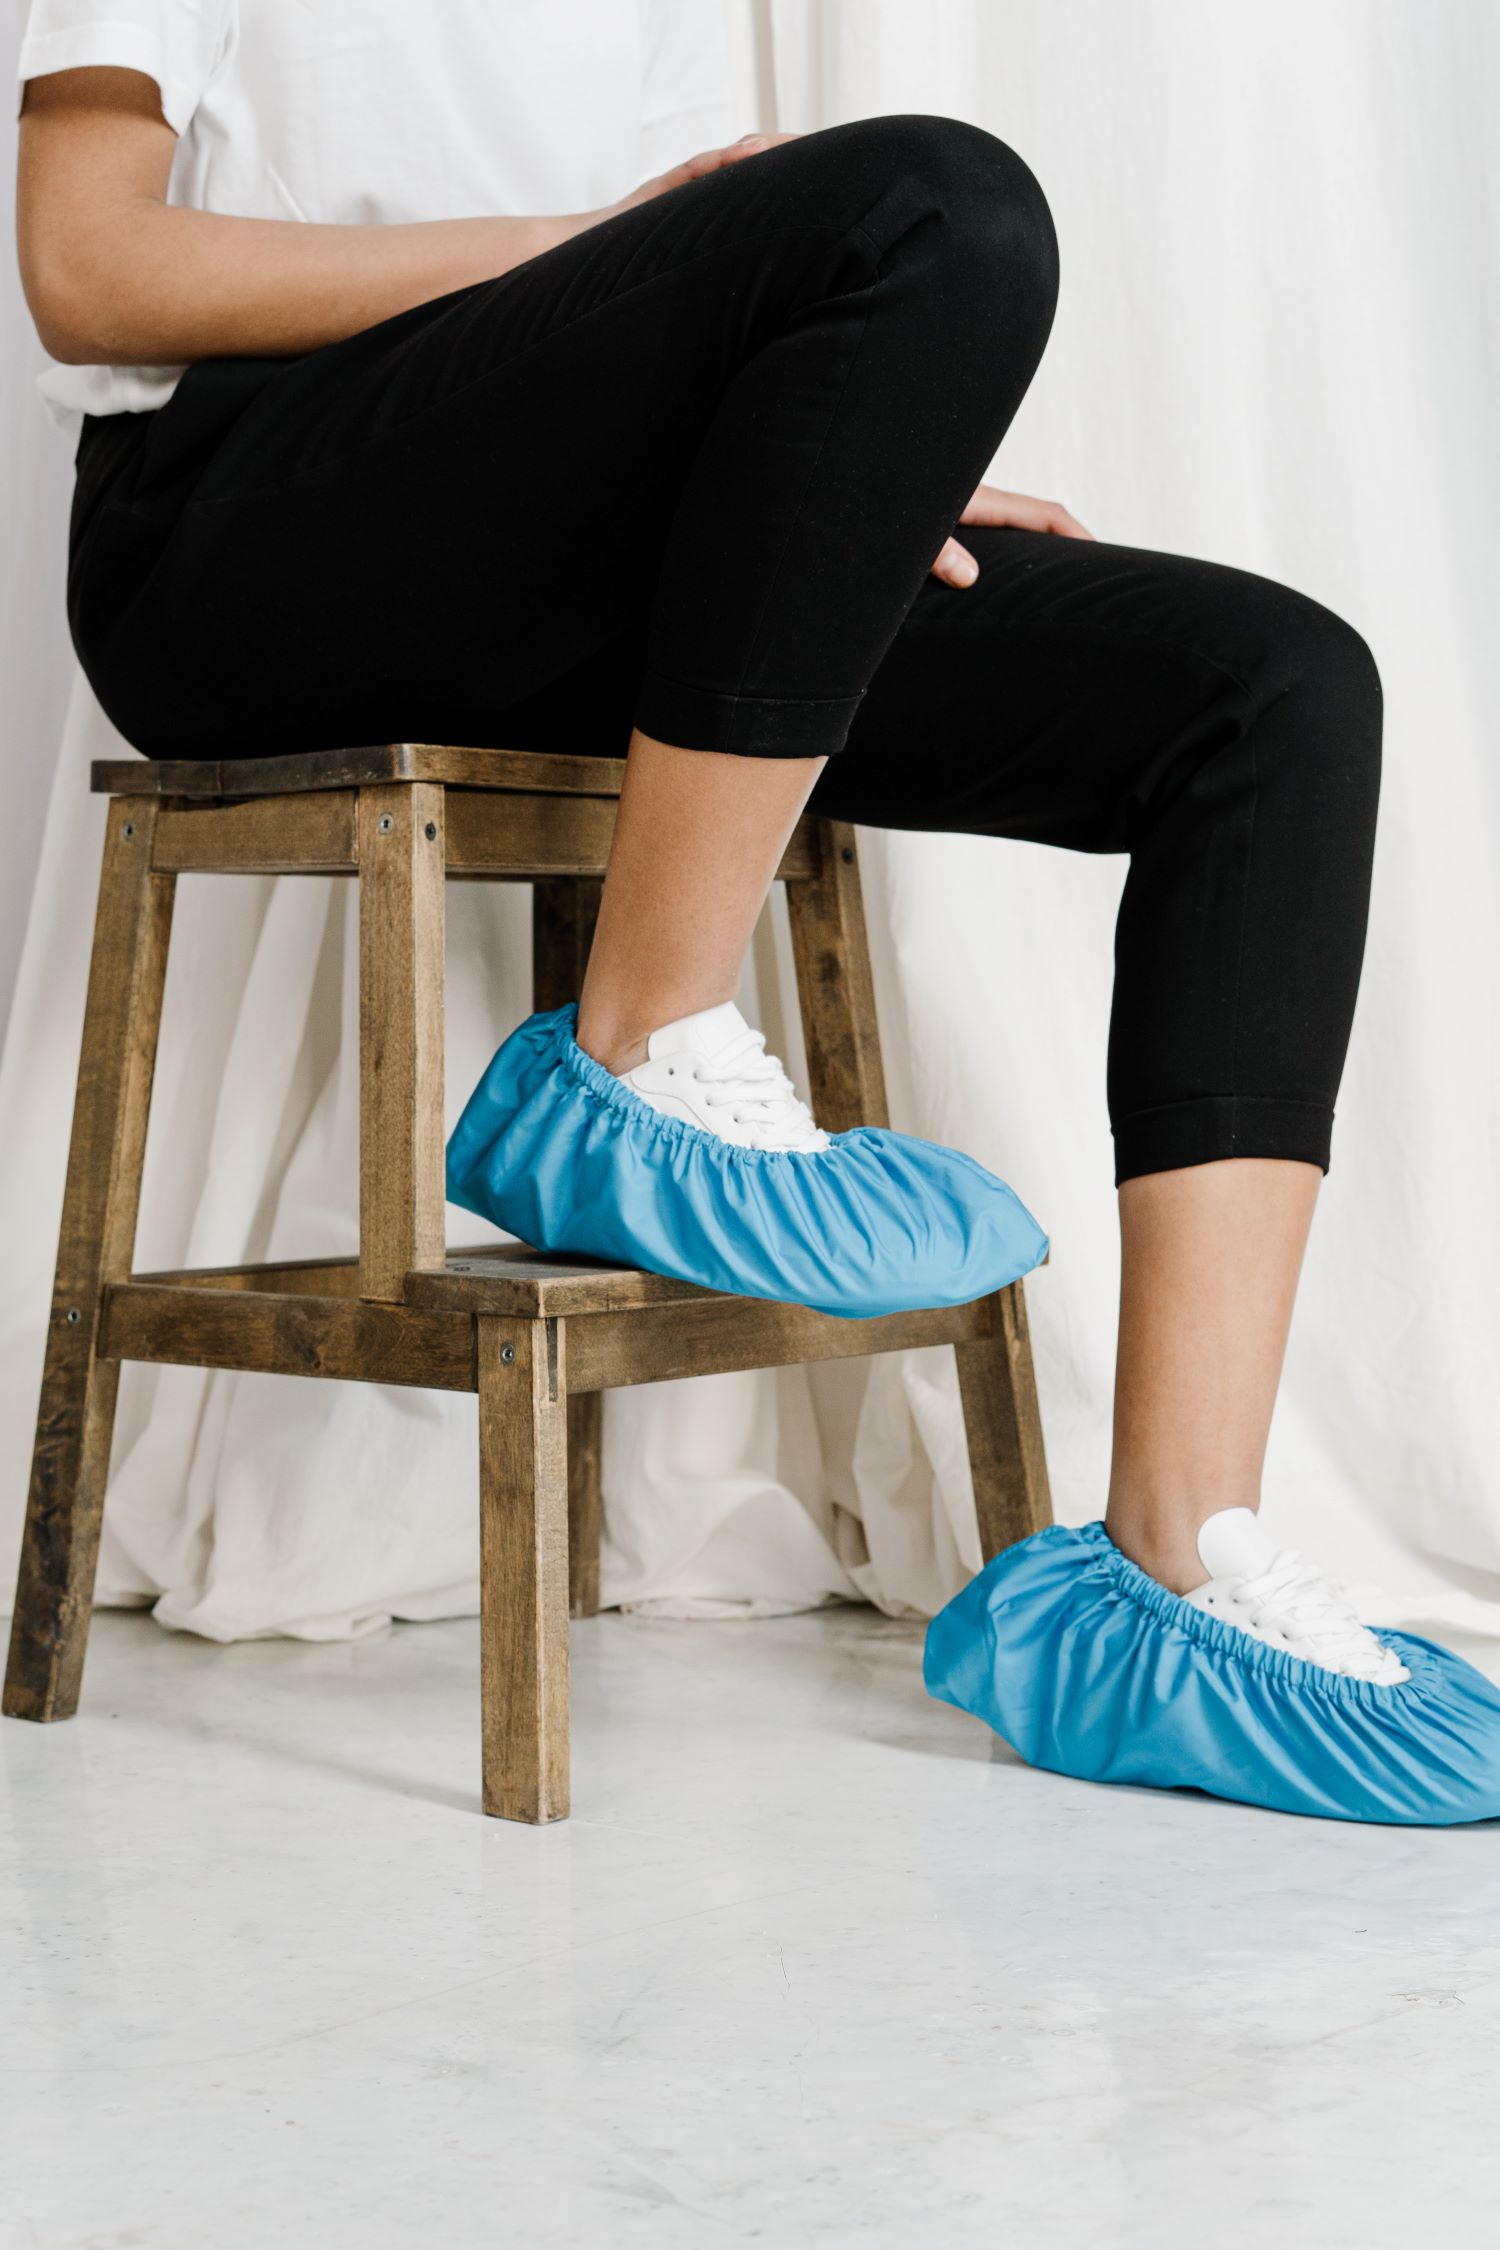 Woman sitting on a stool with her white sneakers covered by shoe booties.